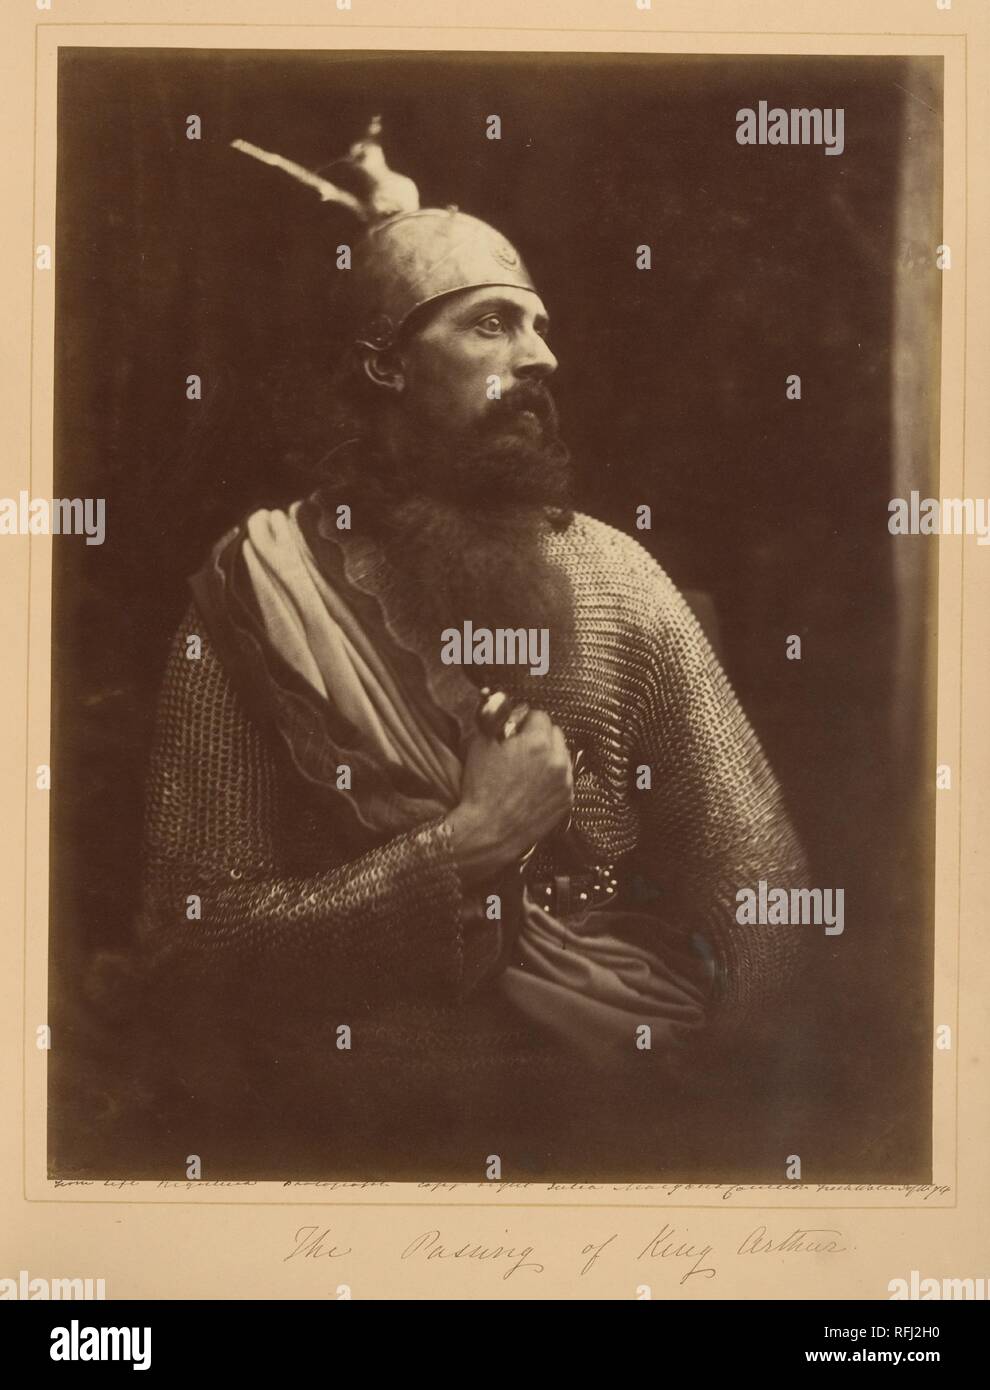 The Passing of King Arthur. Artist: Julia Margaret Cameron (British (born India), Calcutta 1815-1879 Kalutara, Ceylon). Dimensions: 35 x 27.3 cm (13 3/4 x 10 3/4 in. ). Date: 1874.  In 1874 Tennyson asked Cameron to make photographic illustrations for a new edition of his Idylls of the King, a recasting of the Arthurian legends. Responding that both knew that 'it is immortality to me to be bound up with you,' Cameron willingly accepted the assignment. Costuming family and friends, she made some 245 exposures to arrive at the handful she wanted for the book. Ultimately--and predictably--she was Stock Photo